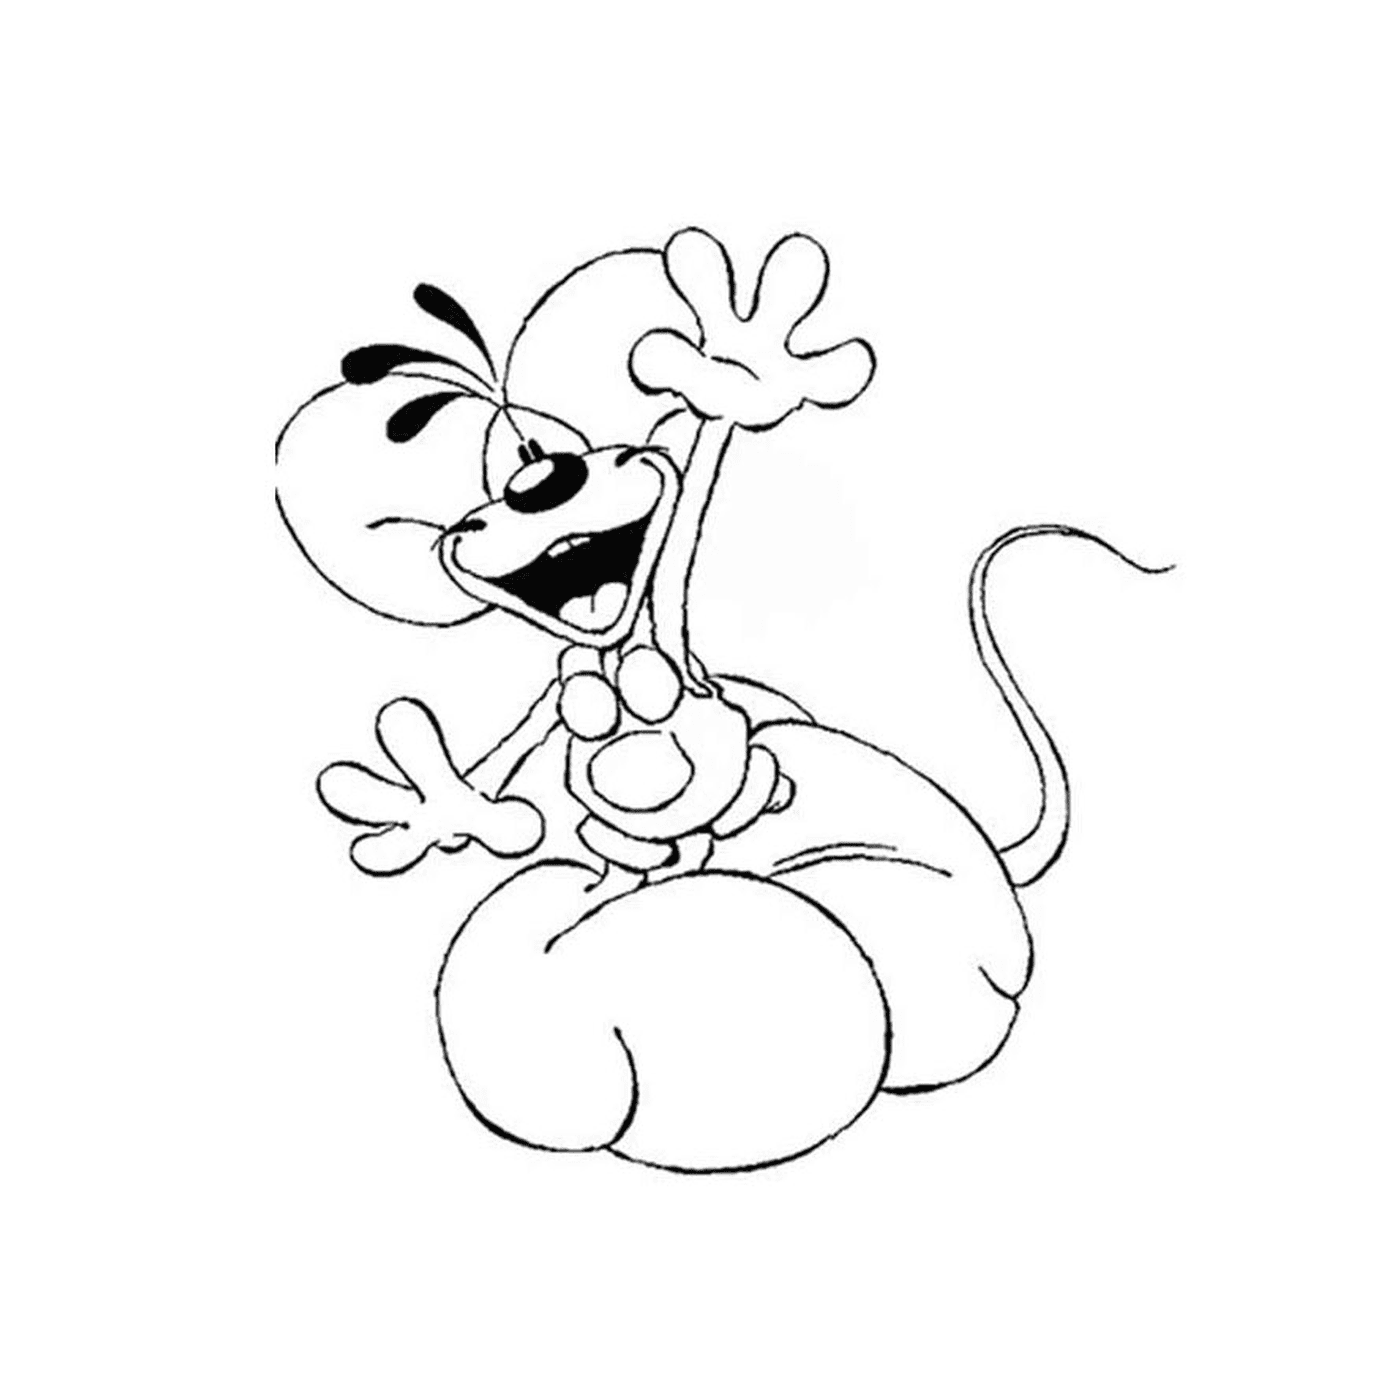  A cartoon mouse sitting on his back legs 